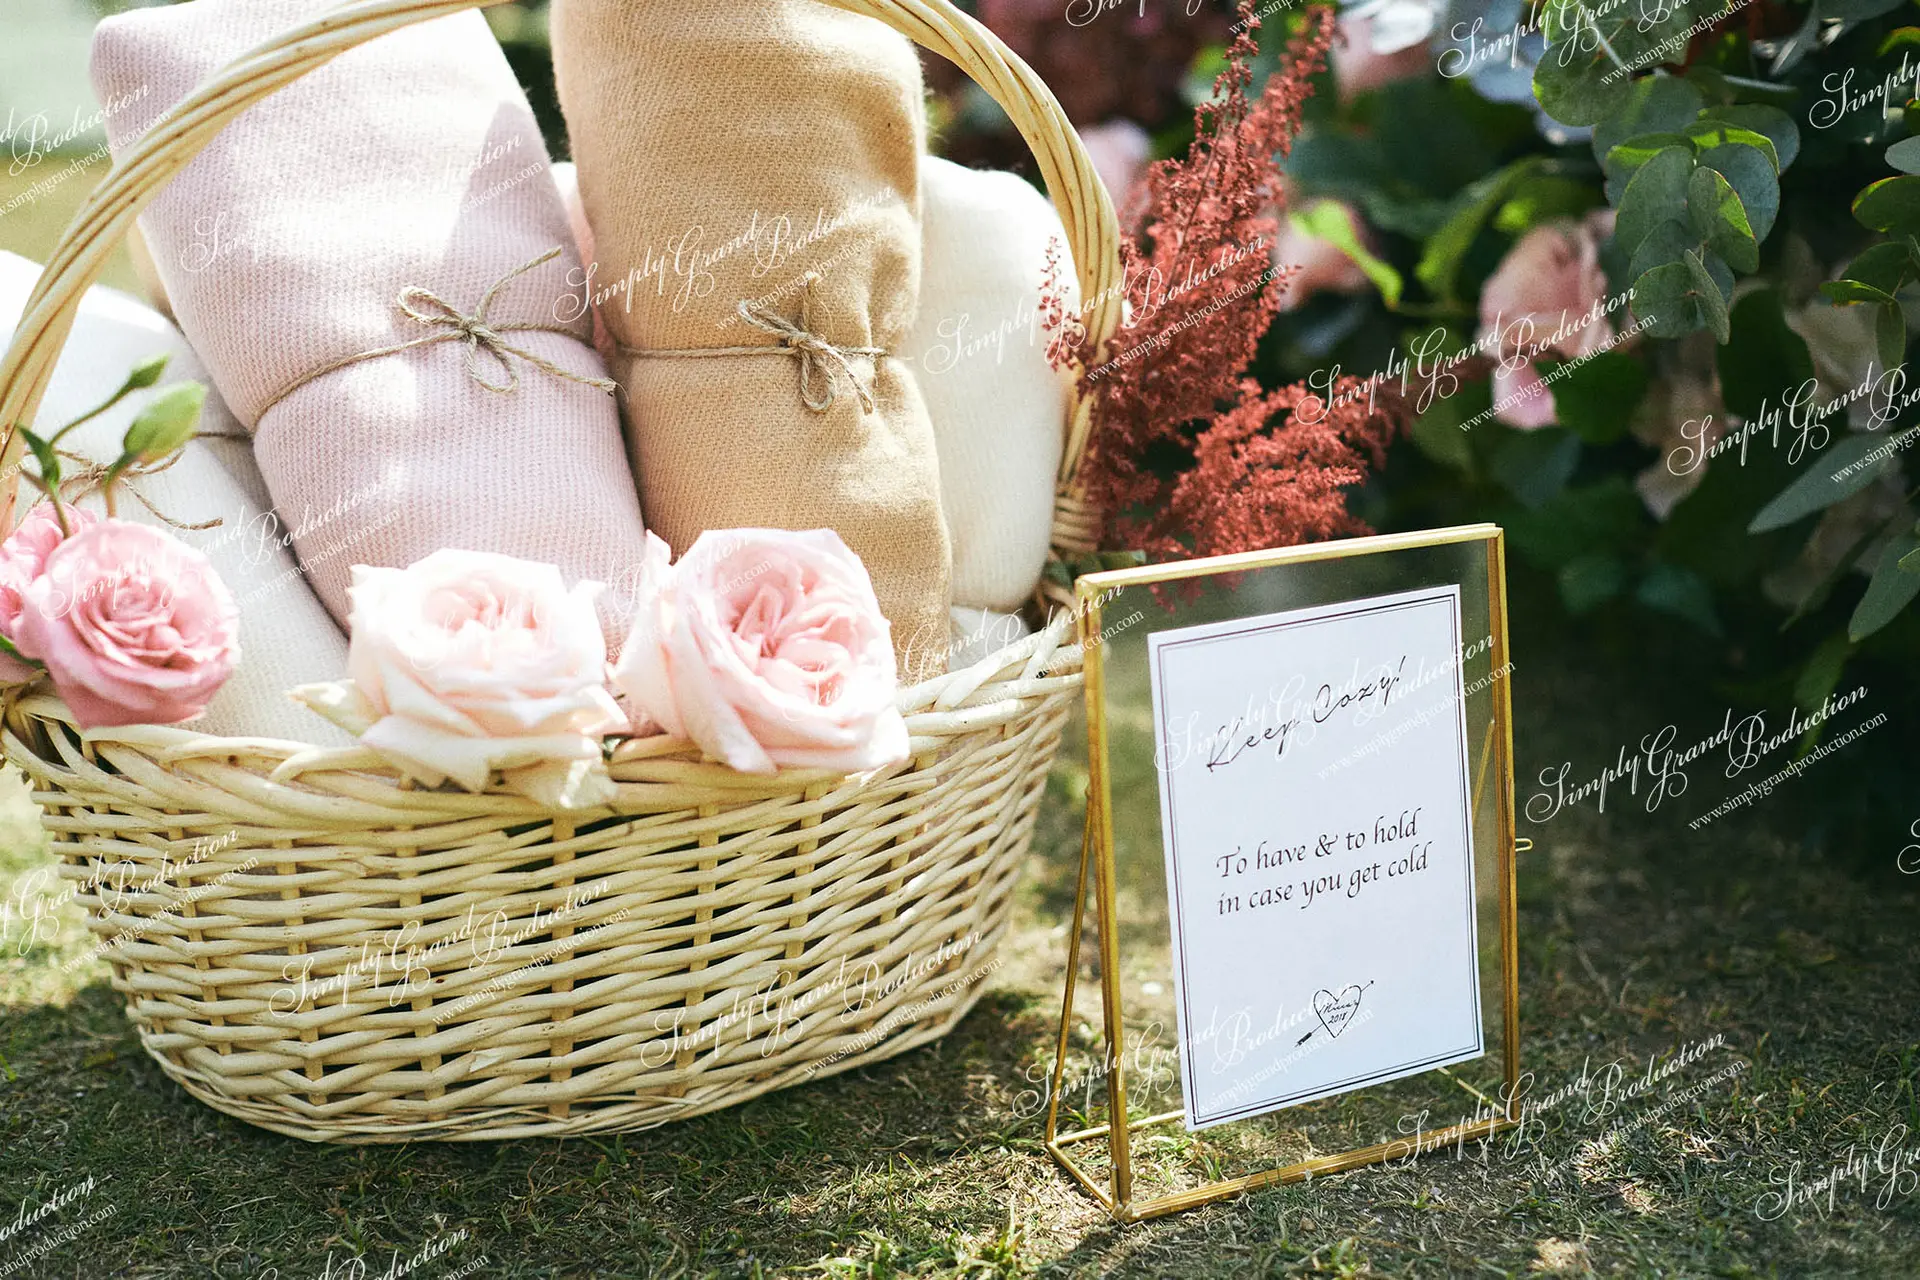 Simply_Grand_Production_Outdoor_wedding_decoration_sign_cozy_idea_Country_Club_2_5.jpg